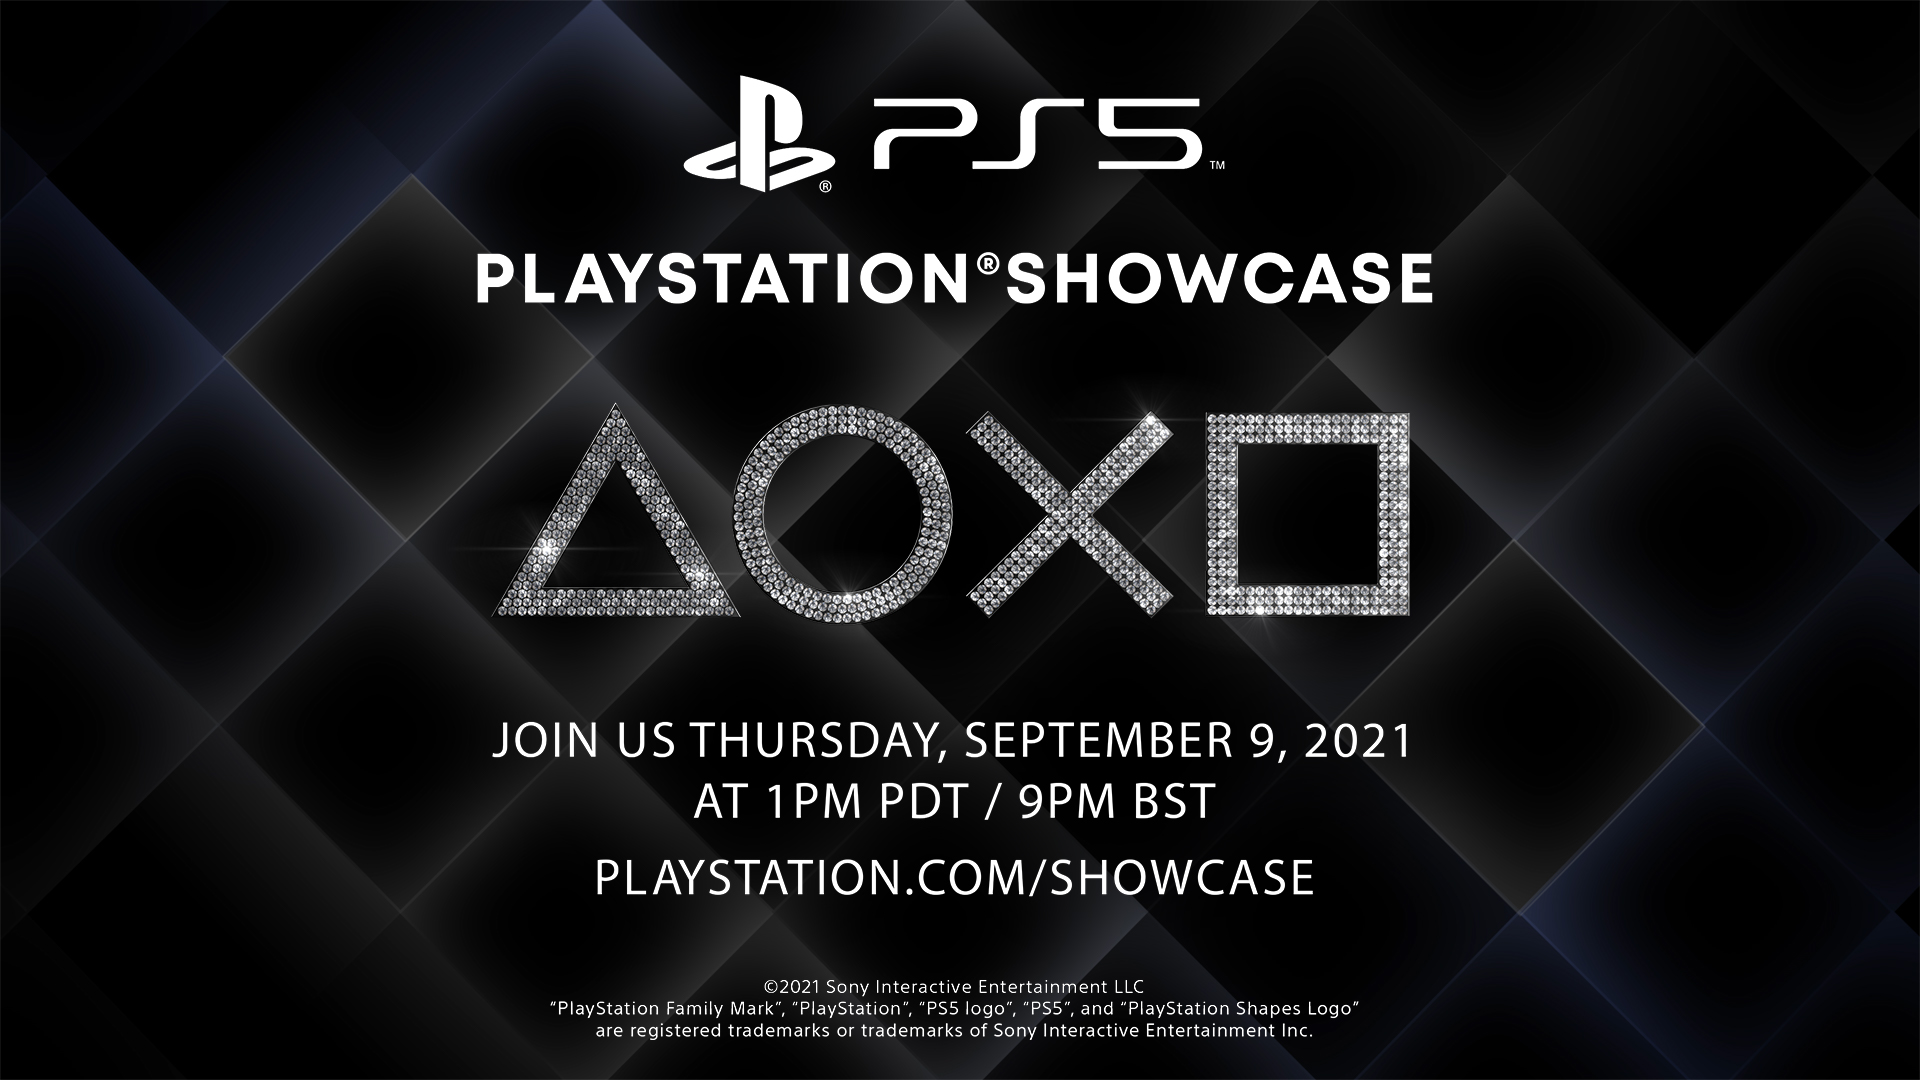 A New PlayStation Showcase is Coming Next Week